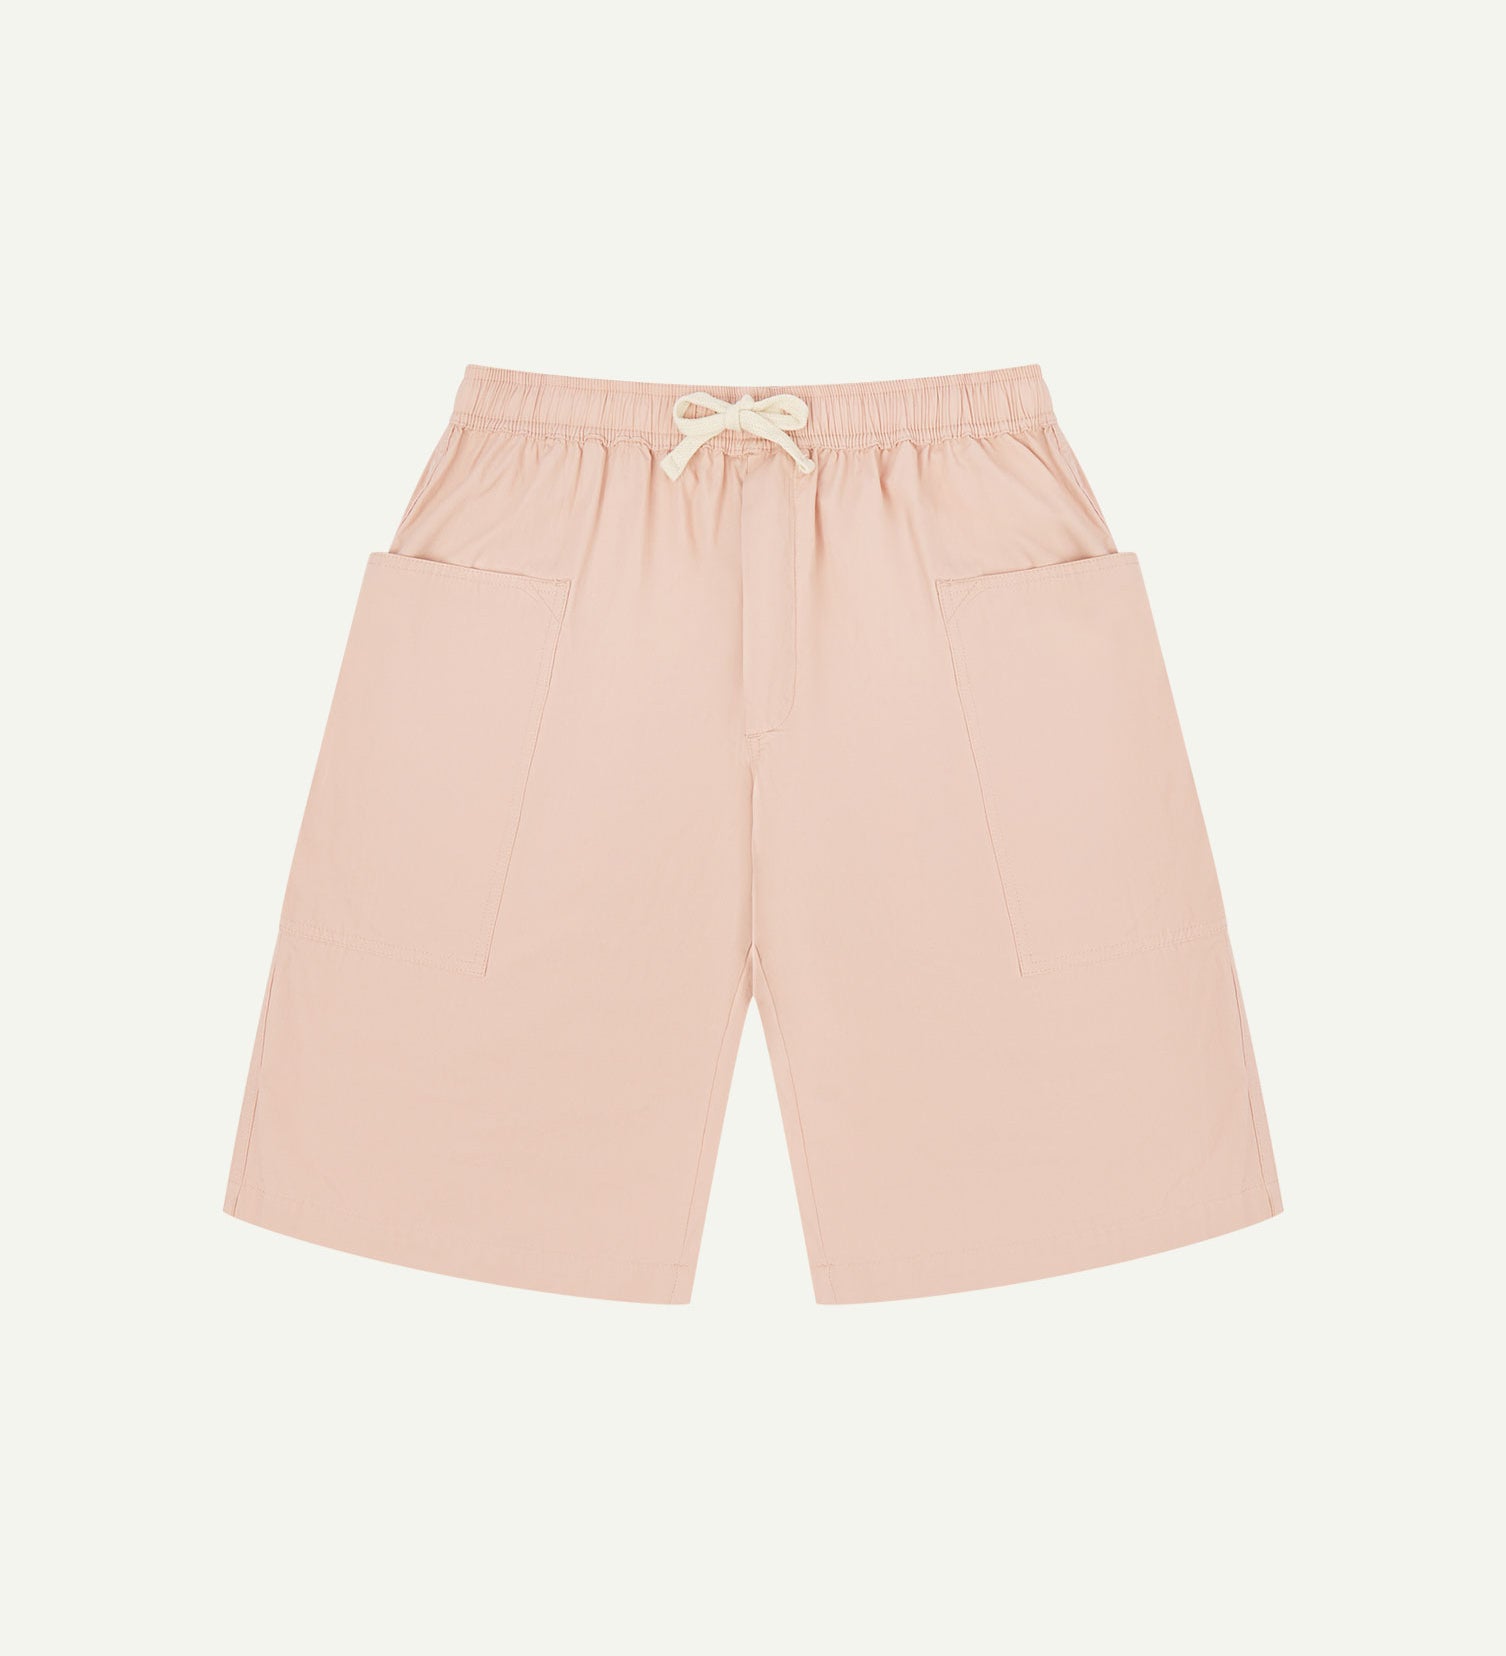 Front flat view of dusty pink organic cotton #5015 lightweight cotton shorts by Uskees. Clear view of drawstring and deep front pockets.